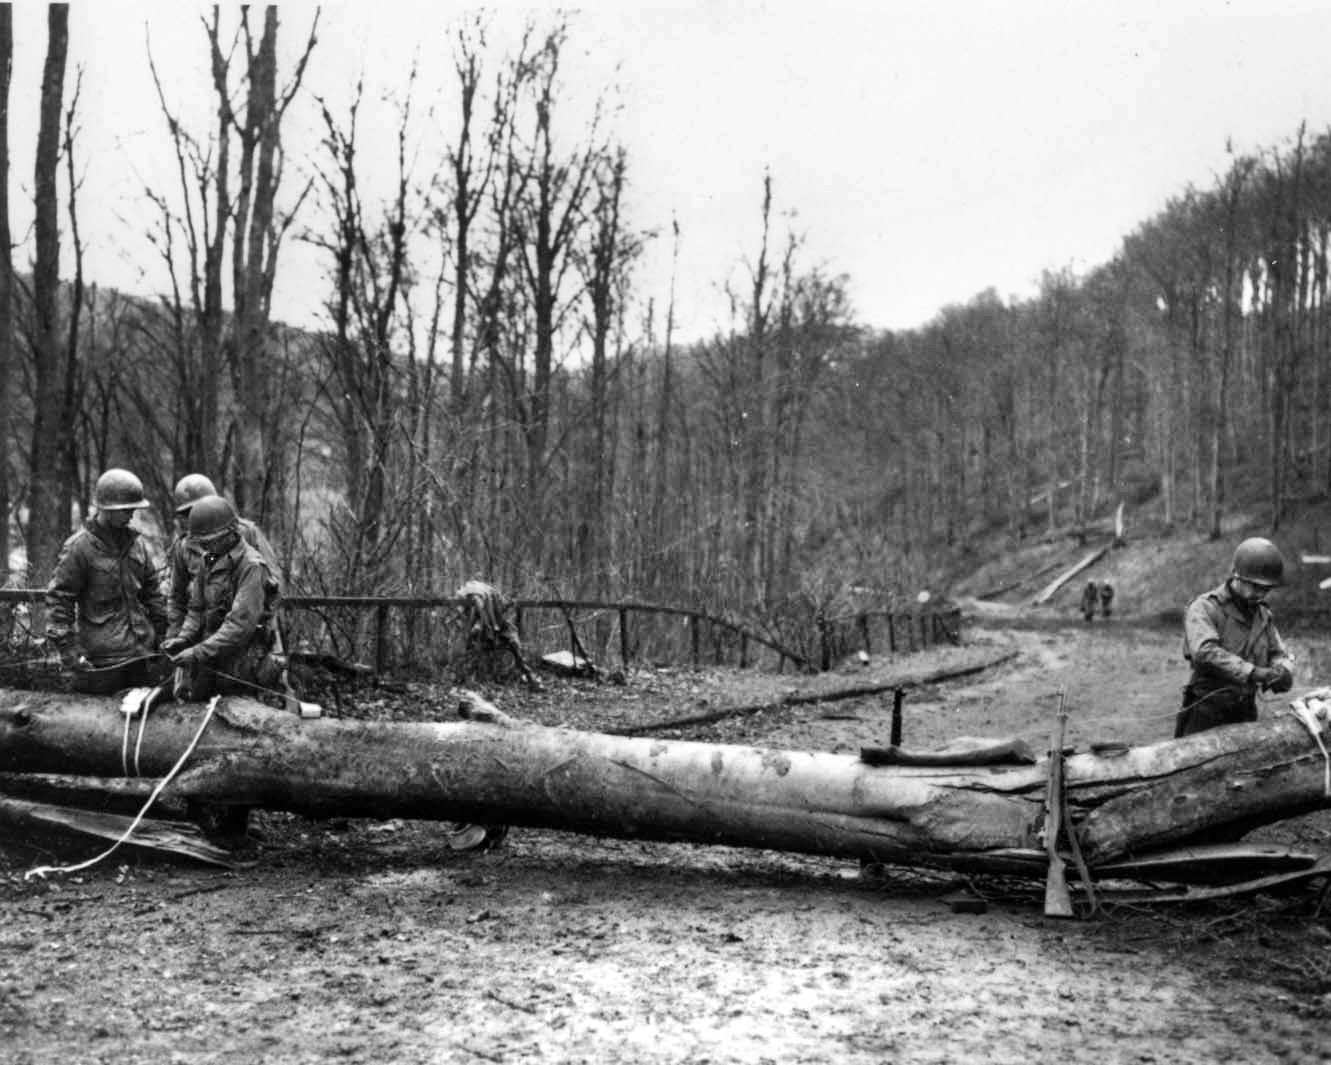 While attempting to slow the German penetration during the Battle of the Bulge in December 1944, American soldiers establish a roadblock. The U.S. 80th Infantry Division played a key role in the relief of Bastogne during the great battle.